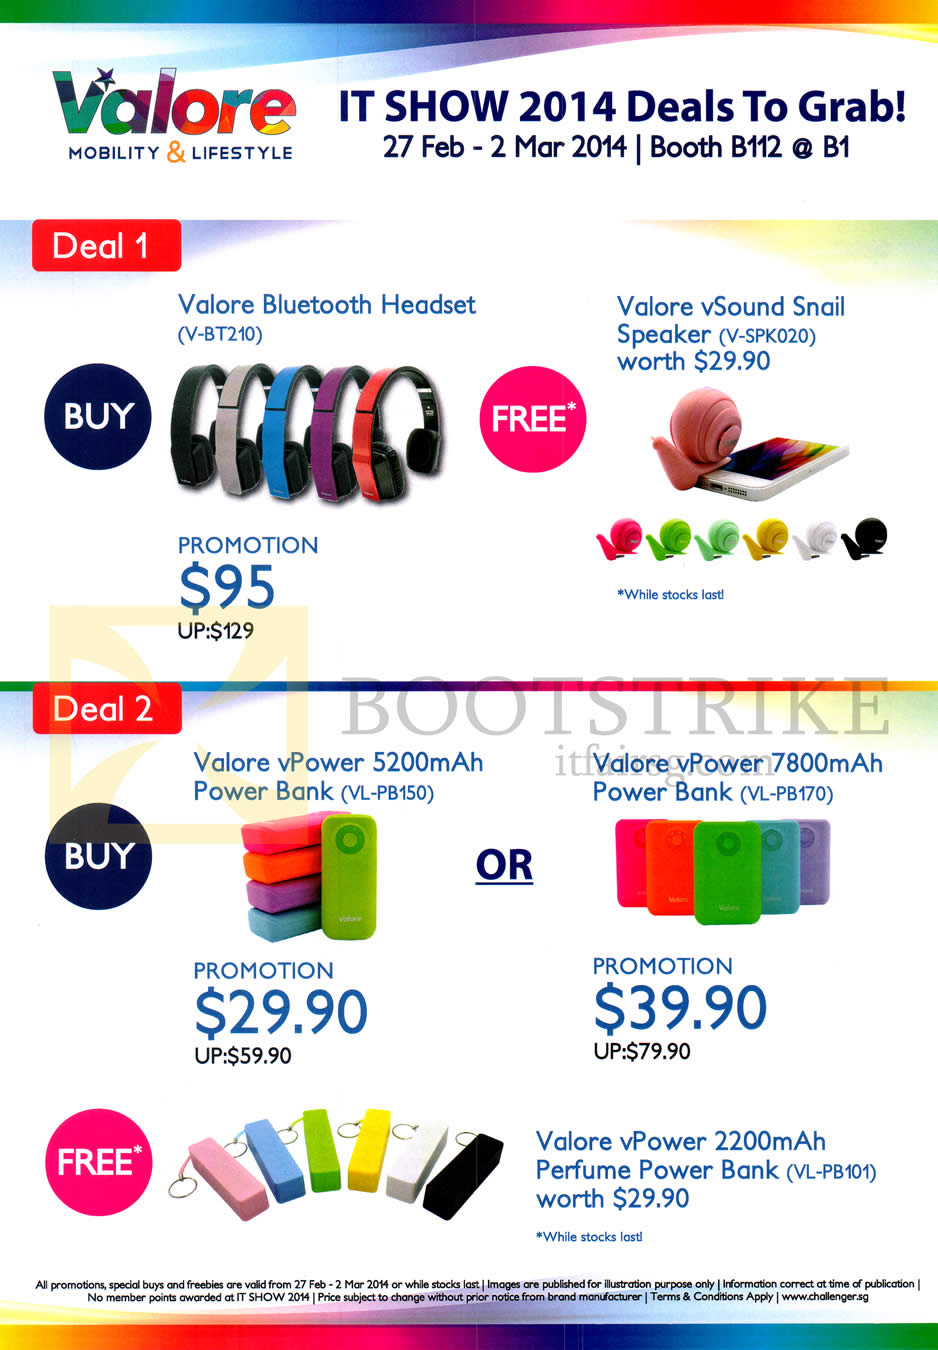 IT SHOW 2014 price list image brochure of Challenger Valore Bluetooth Headsets, Snail Speakers, Power Banks